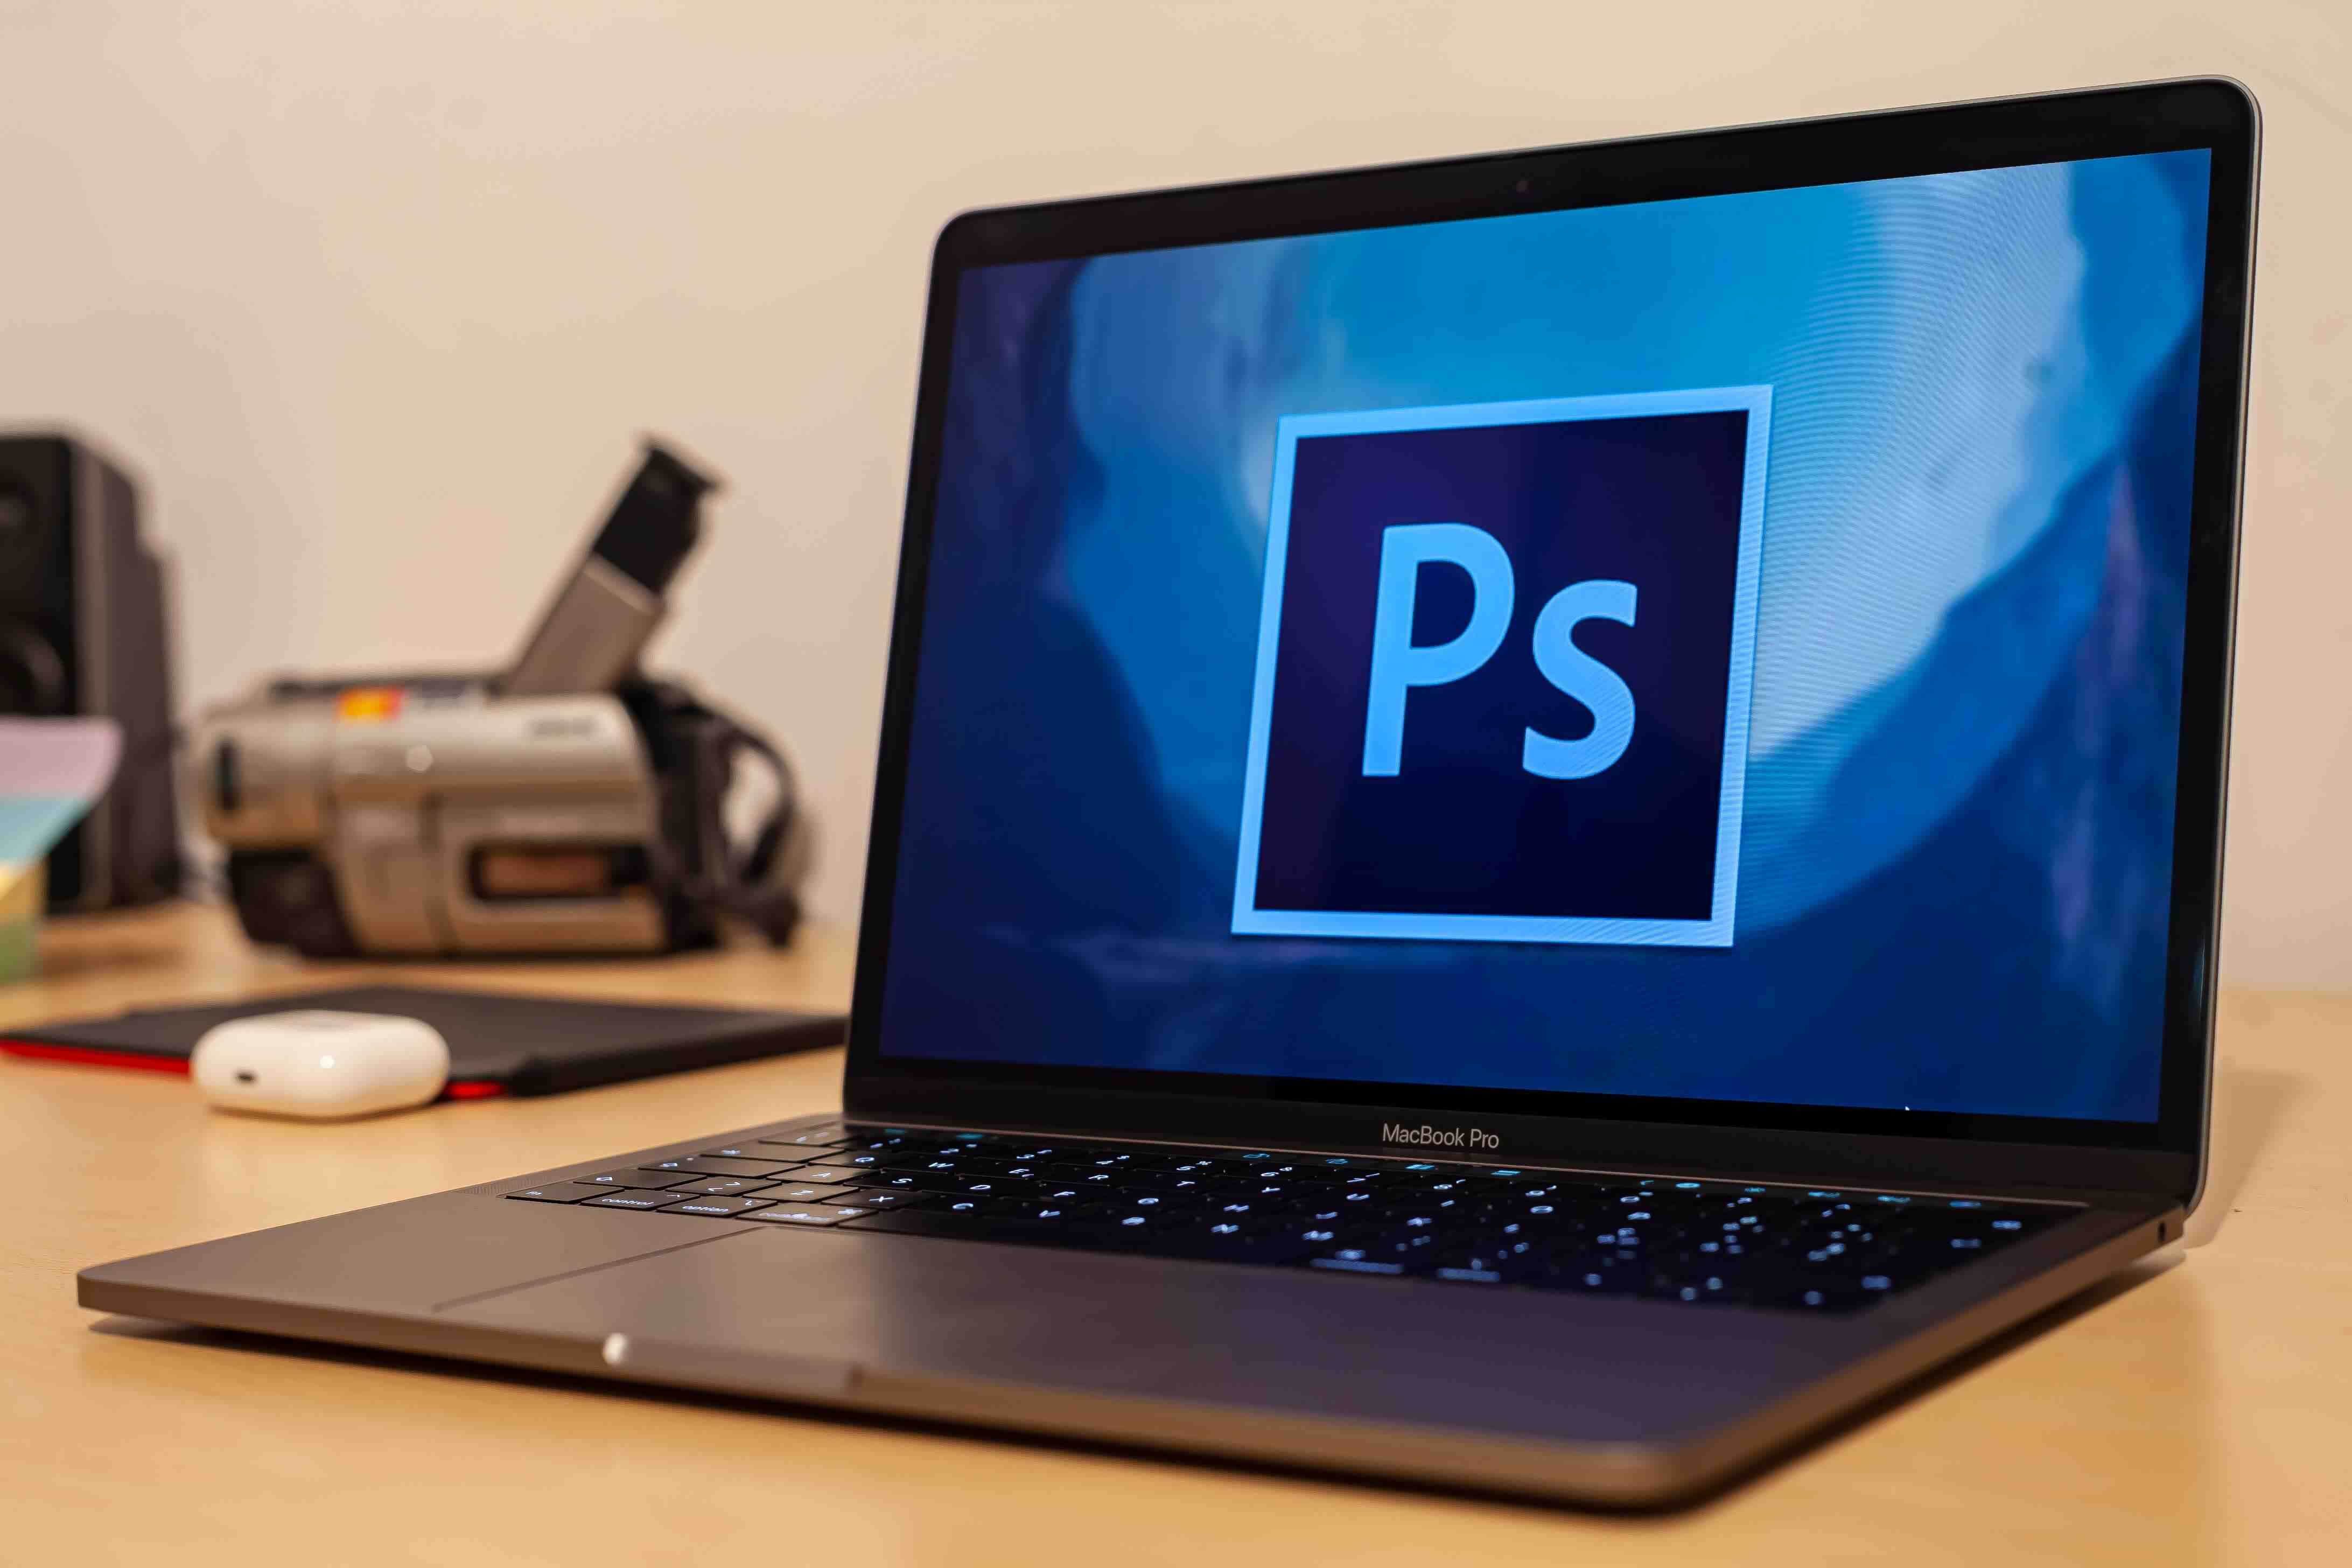 photoshop software in a laptop